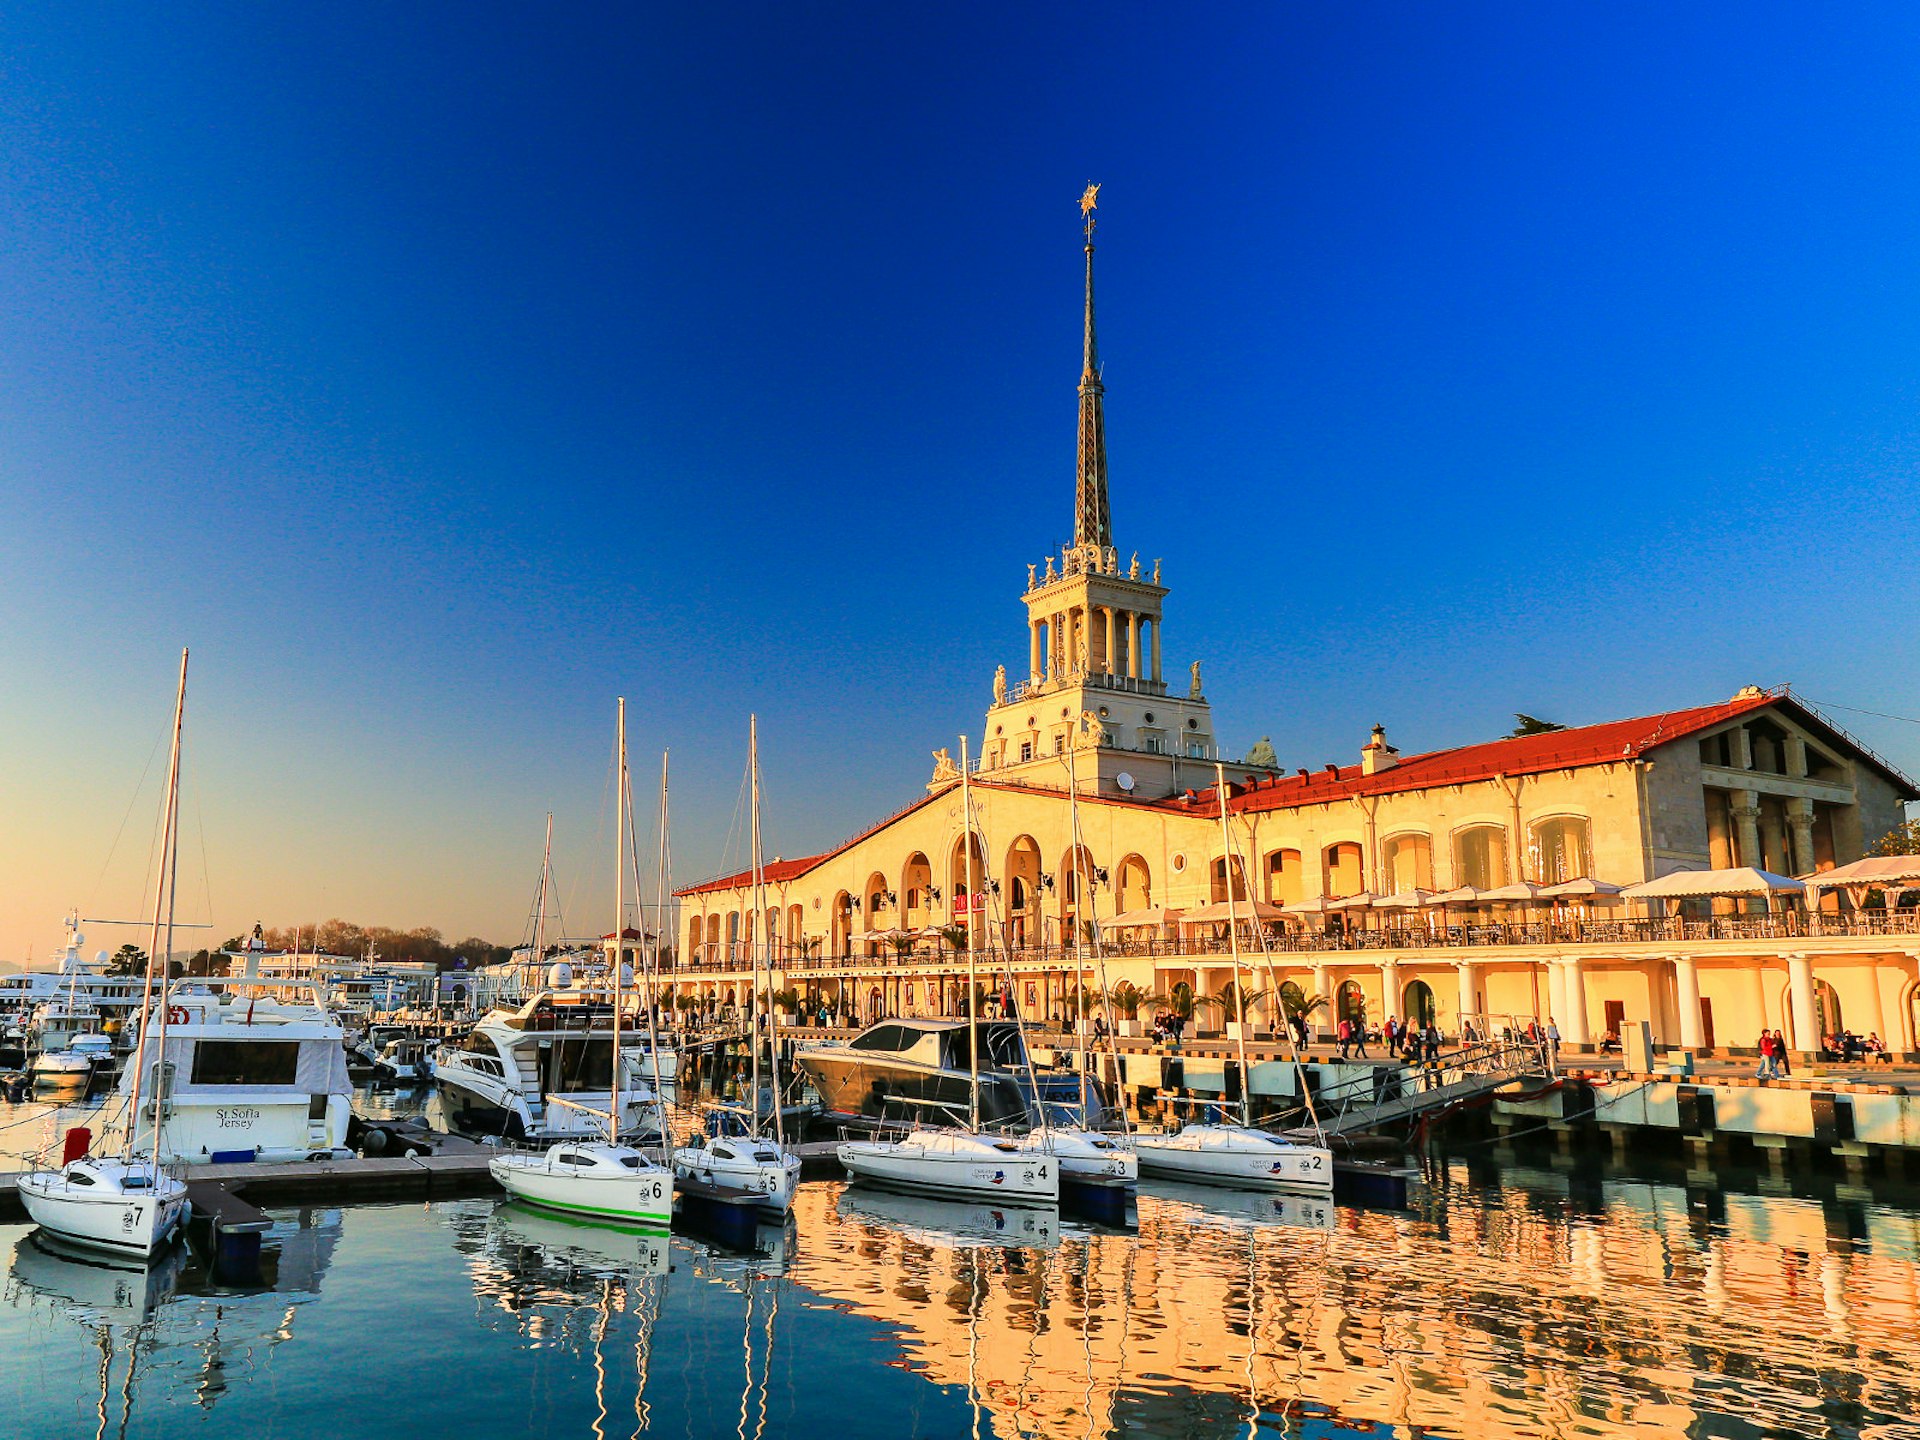 Yachts and sailing boats docked at Sochi’s historic port on the Black Sea © Goncharovaia / Shutterstock